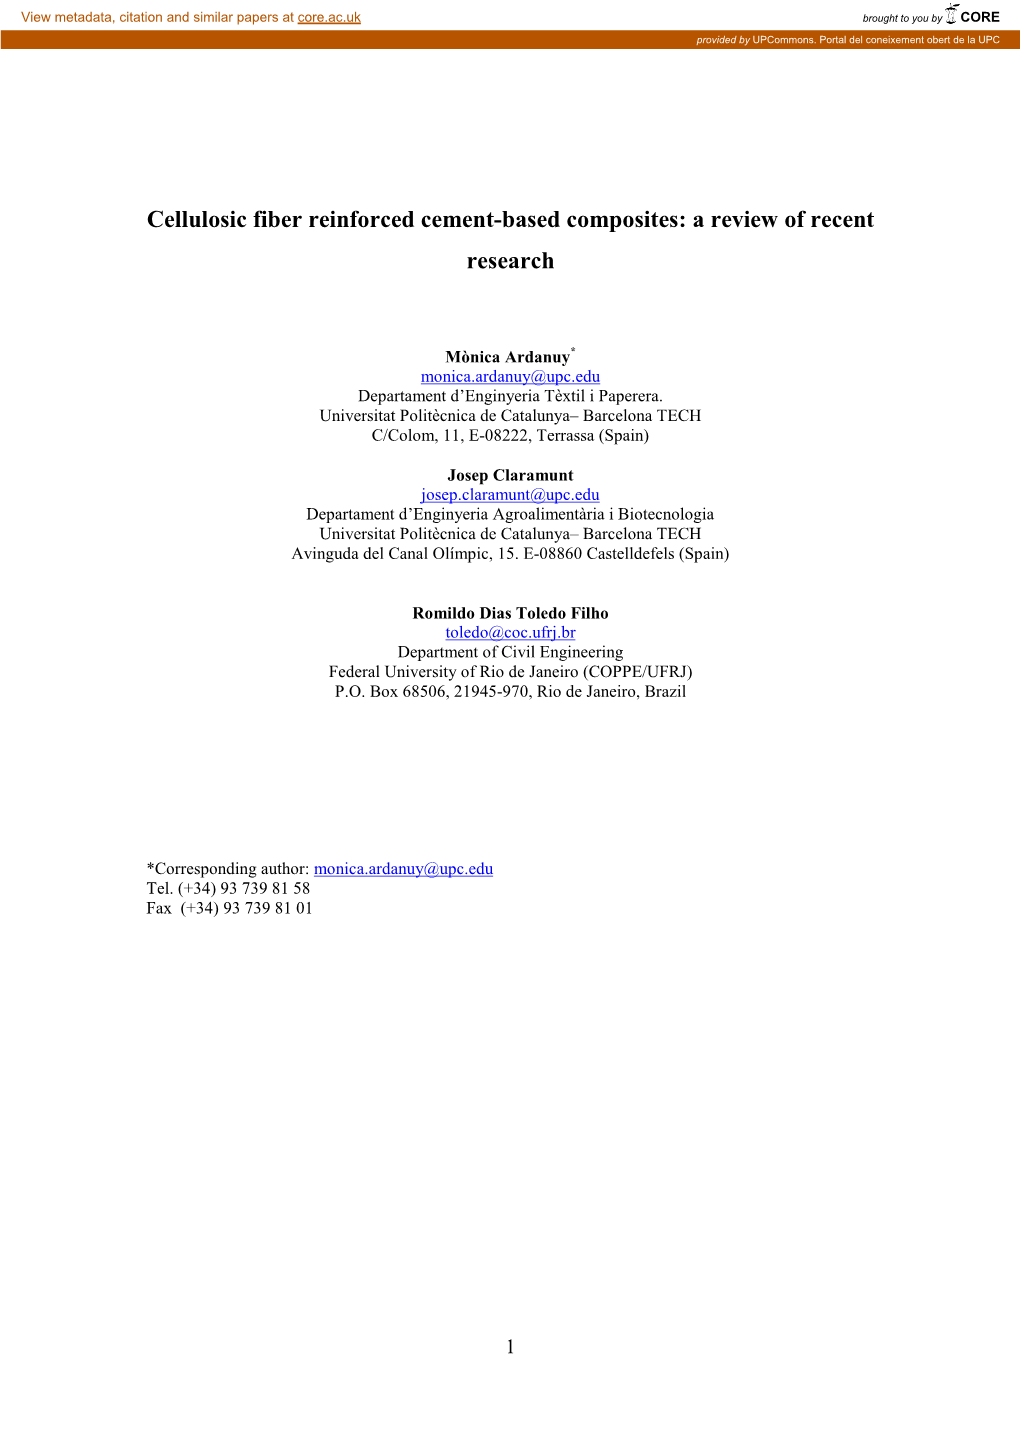 Cellulosic Fiber Reinforced Cement-Based Composites: a Review of Recent Research